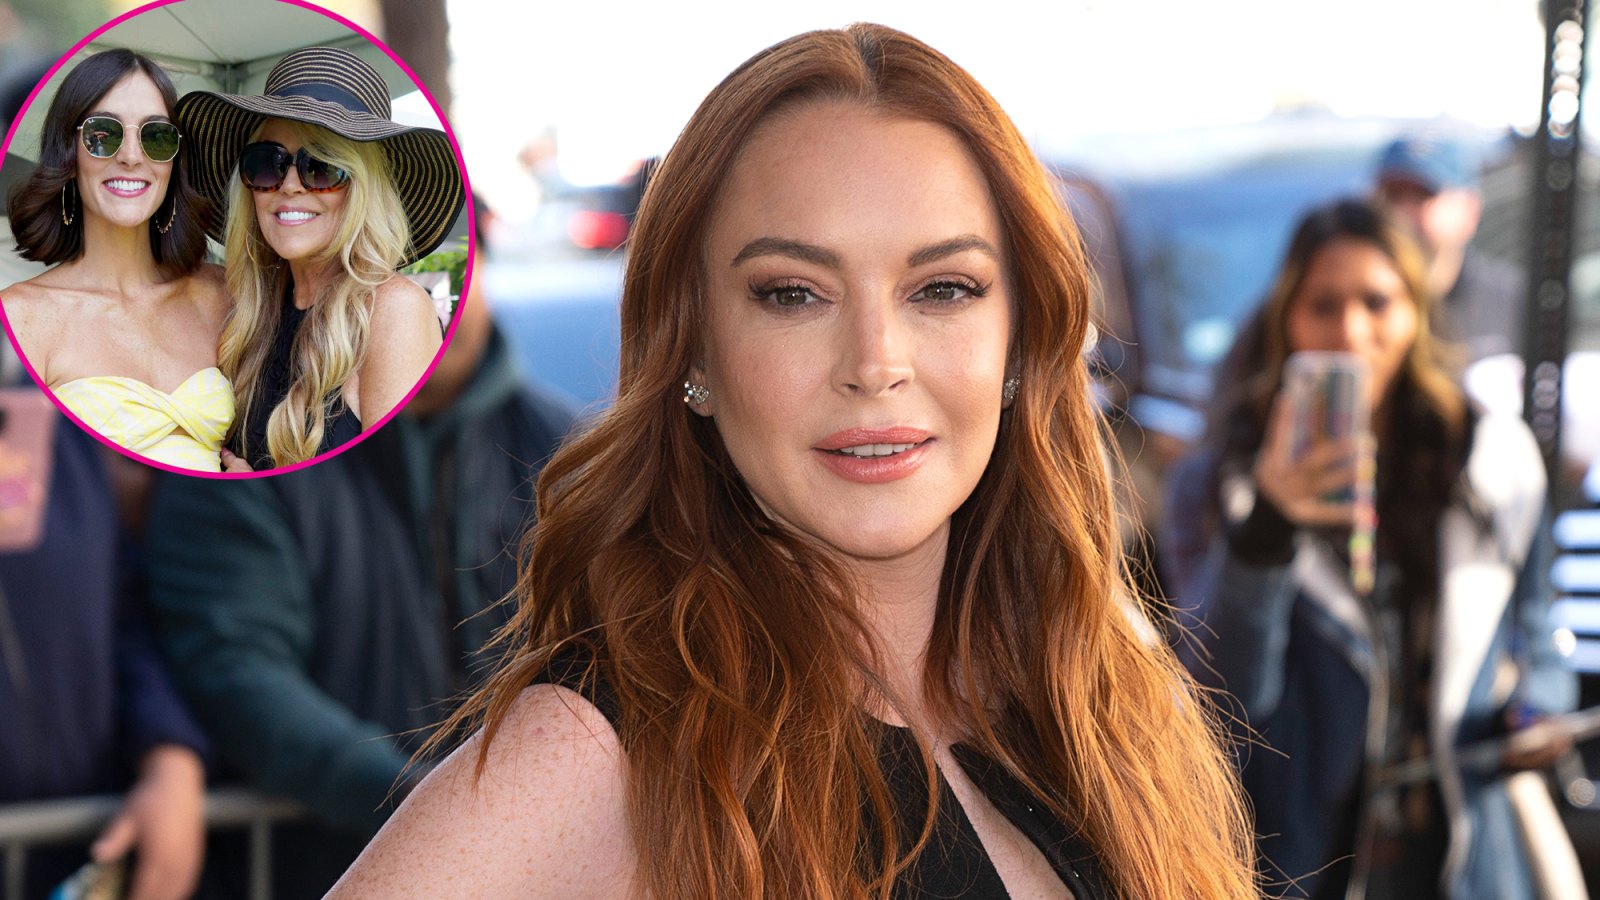 Pregnant Lindsay Lohan Celebrates 1st Child's Arrival at Baby Shower With Mom Dina, Sister Ali: Photo